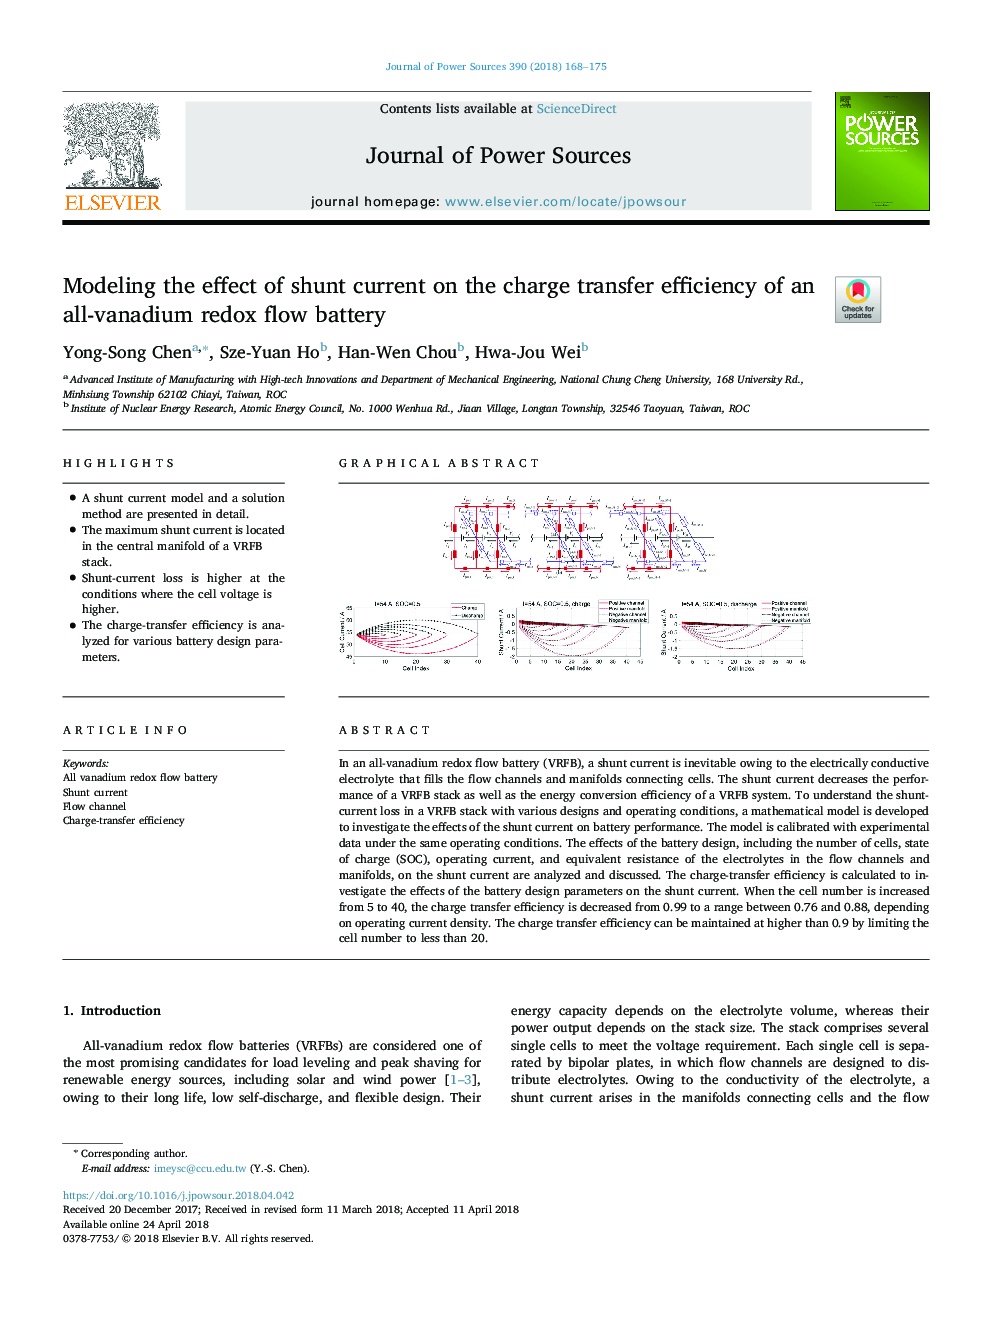 Modeling the effect of shunt current on the charge transfer efficiency of an all-vanadium redox flow battery